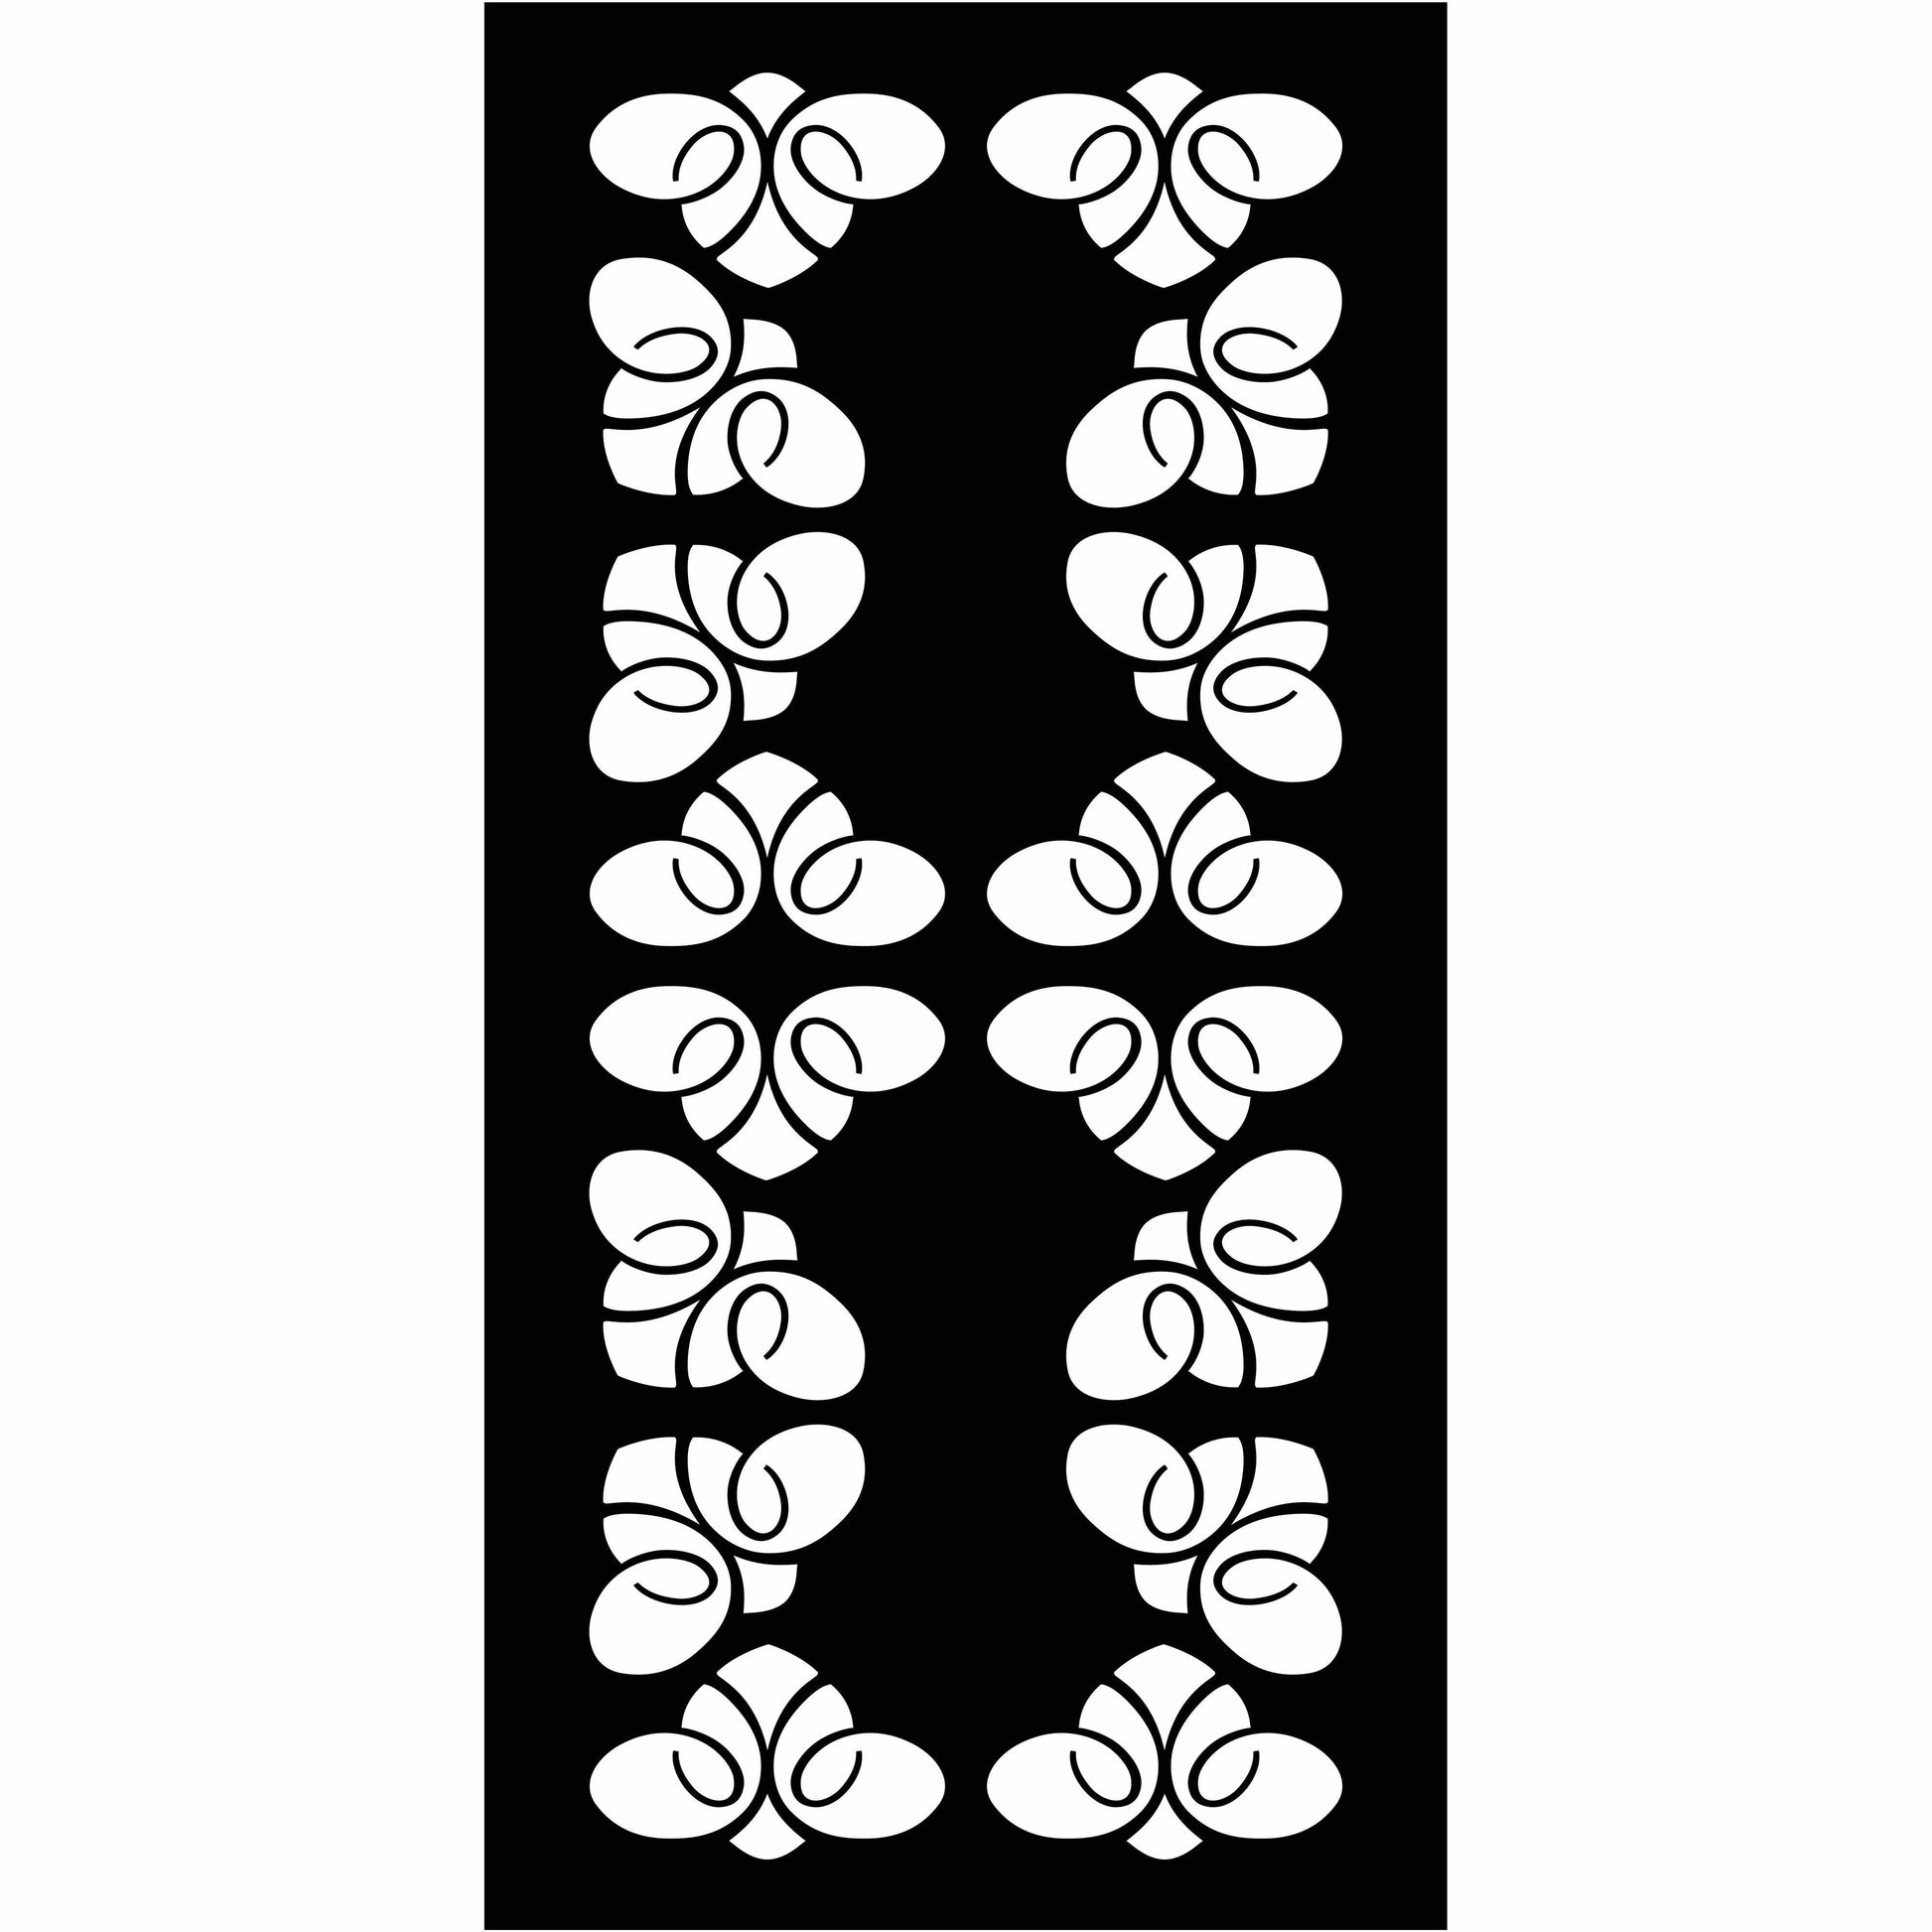 Abstract and Floral Decorative Privacy Screen Panels Doors or Fence-Free DXF files Cut Ready CNC Designs-dxfforcnc.com